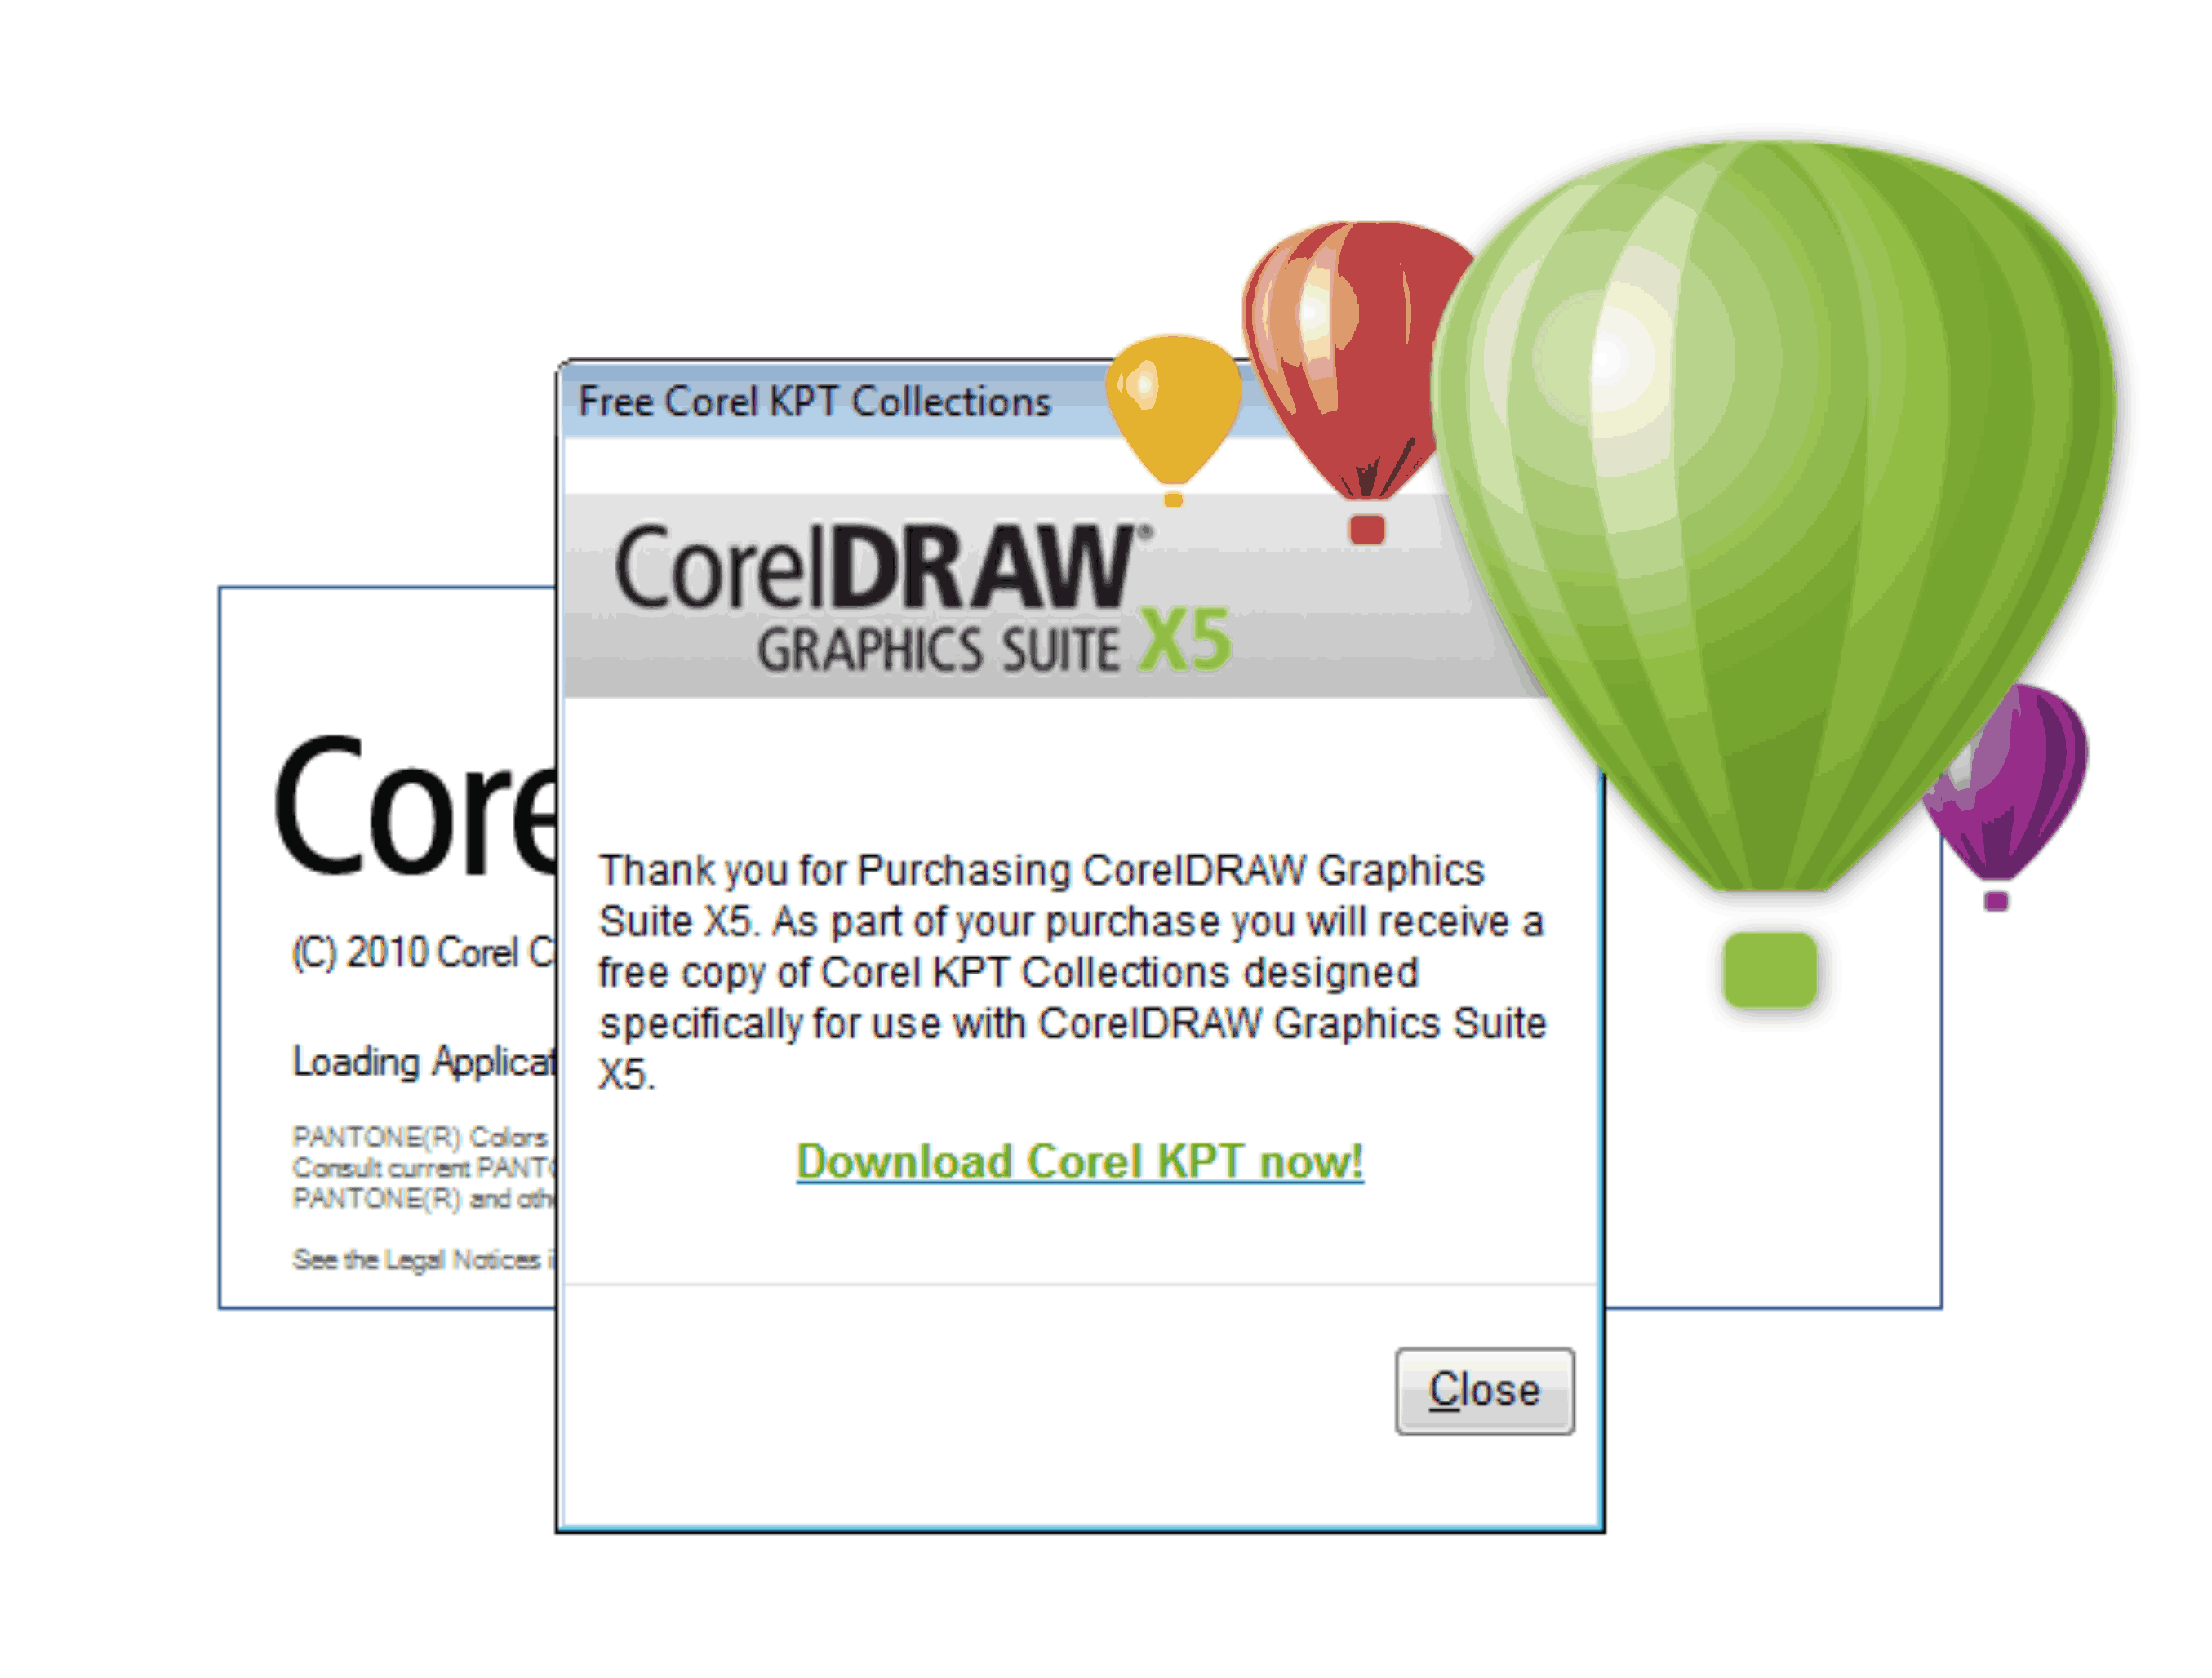 corel free clipart collection - photo #32